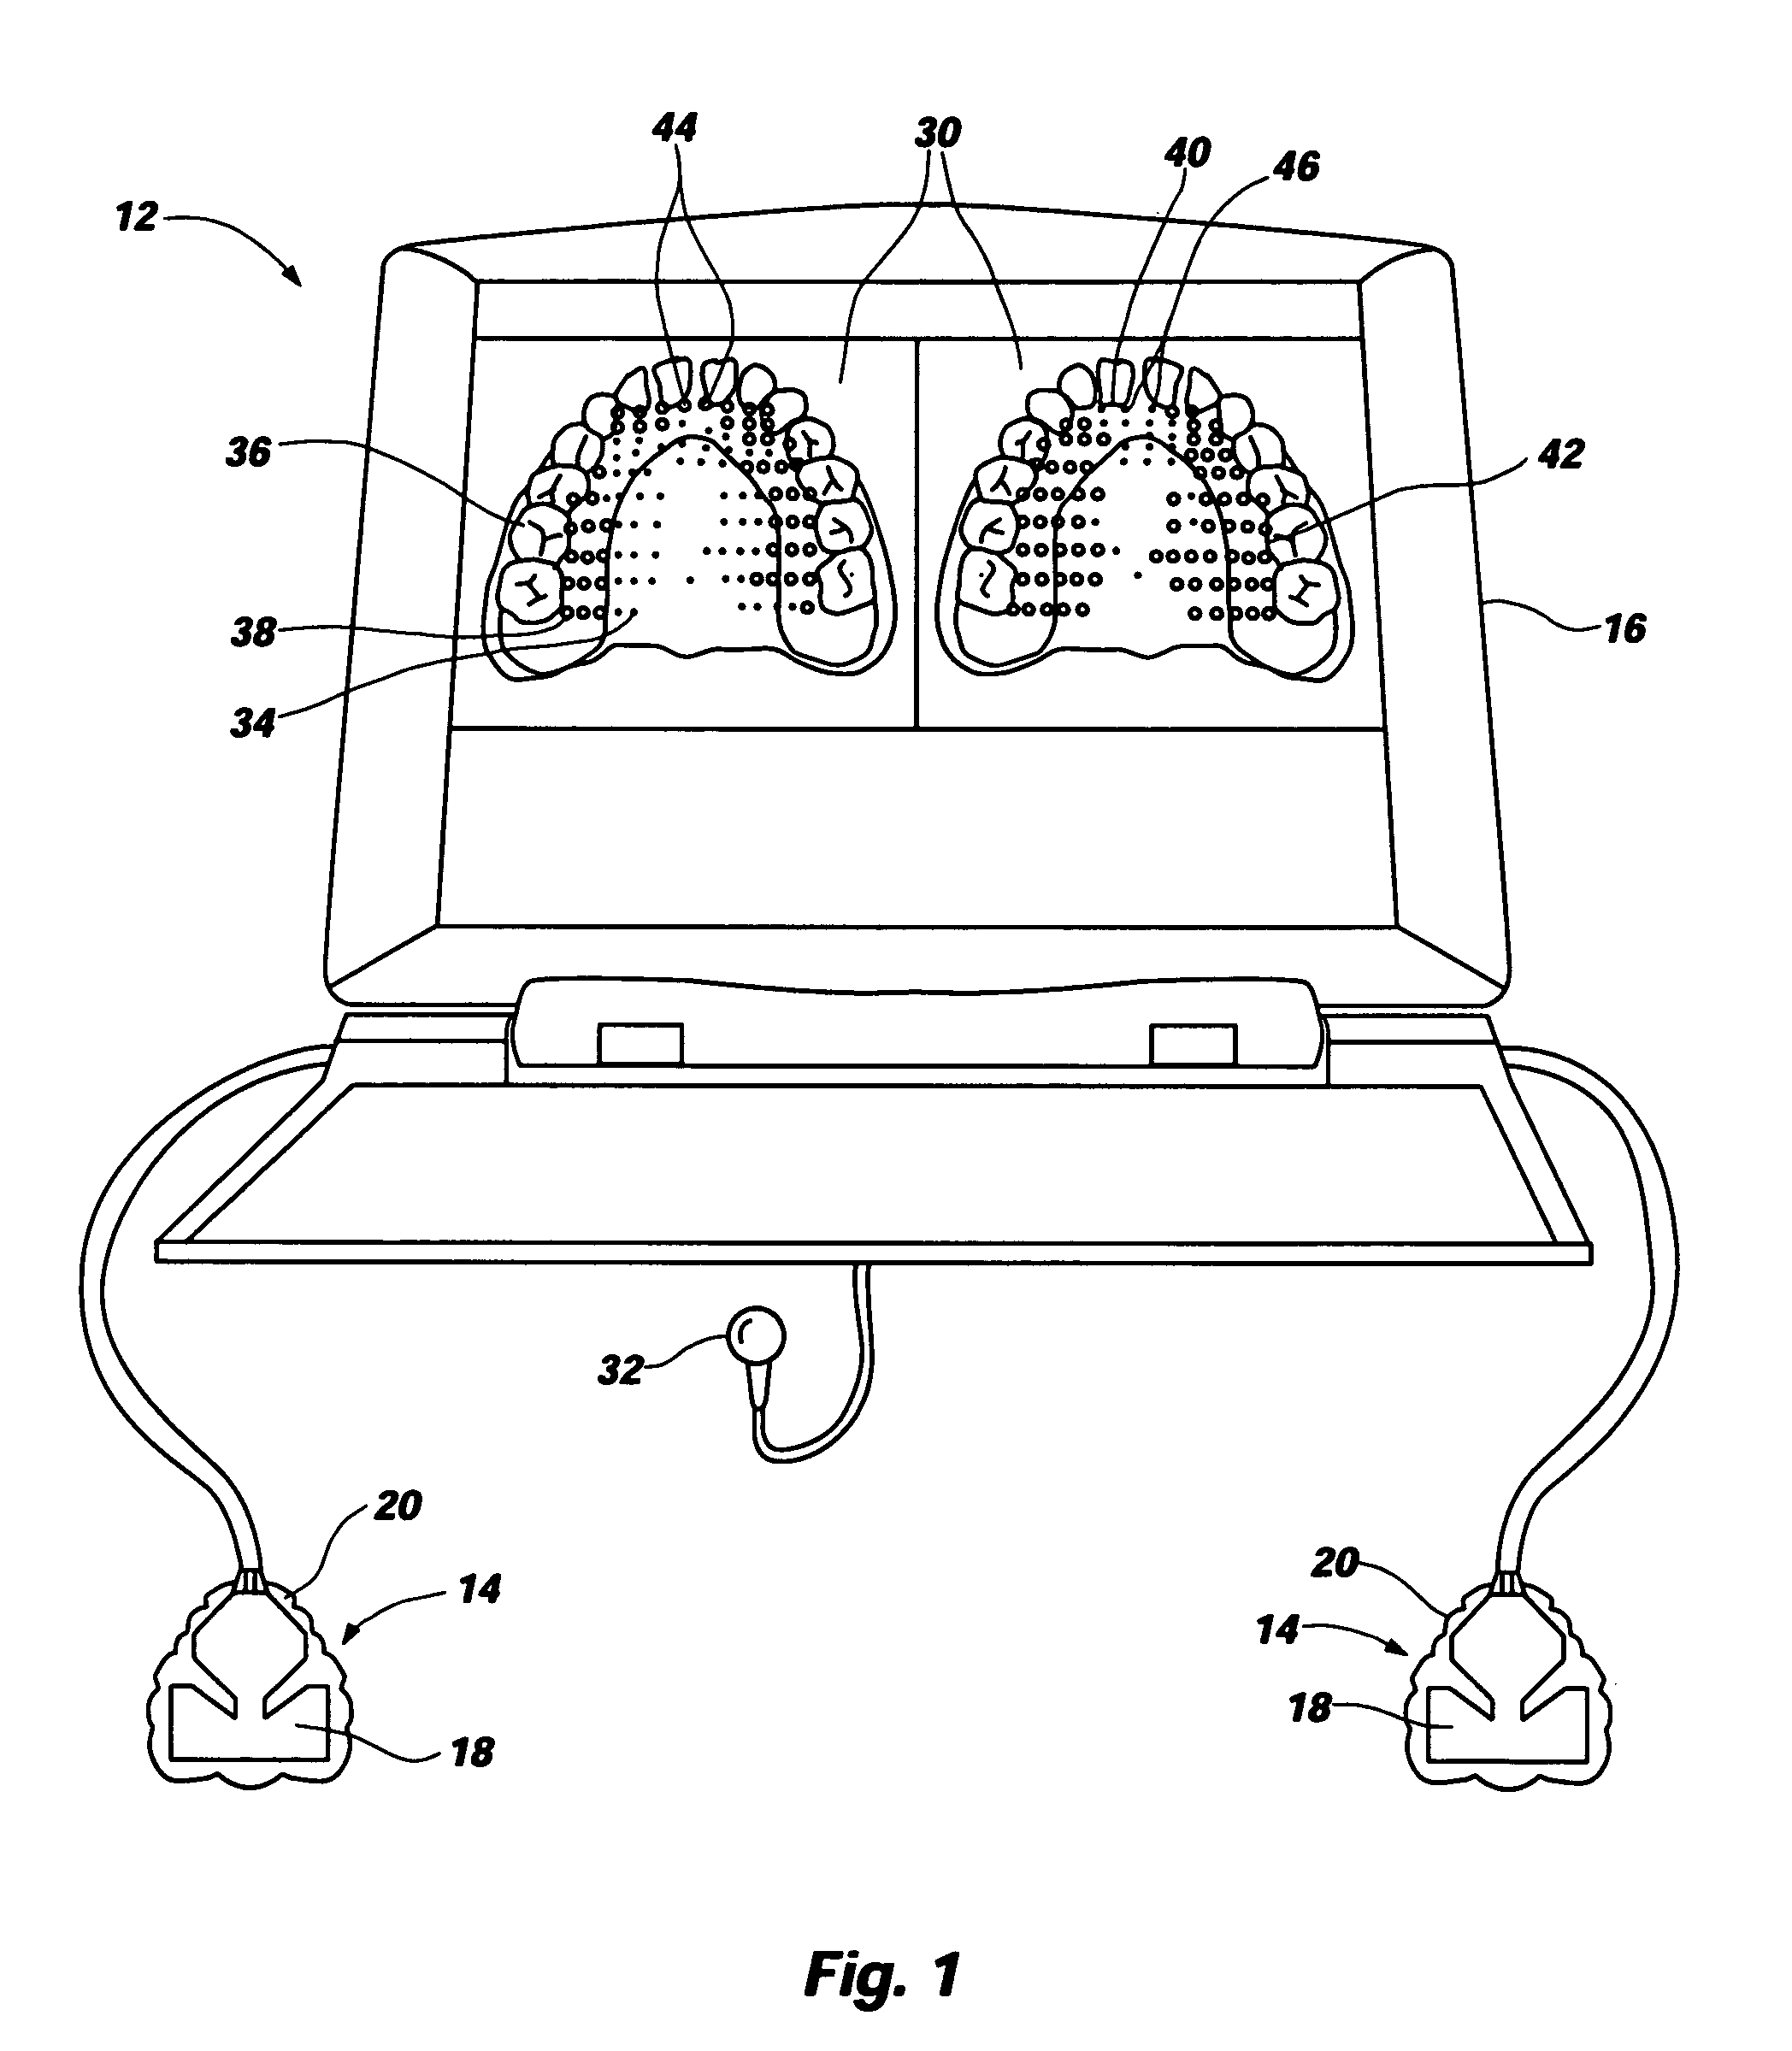 Method for utilizing oral movement and related events